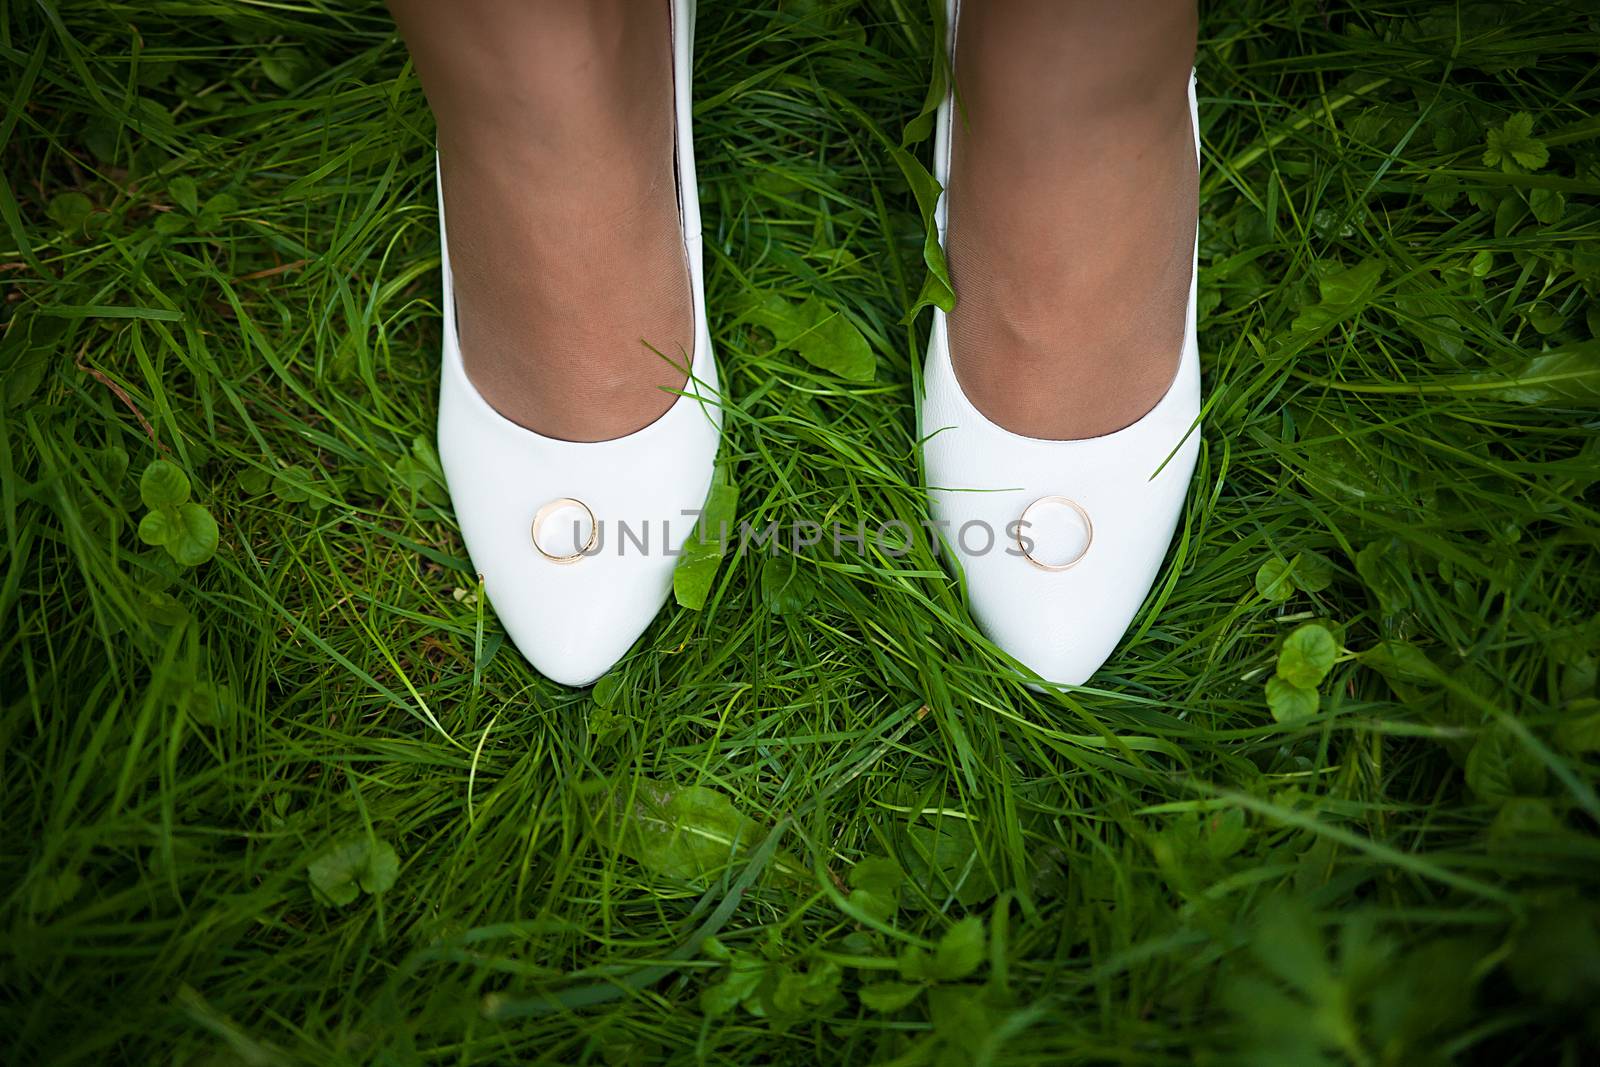 Wedding sandals and weddings rings on the grass